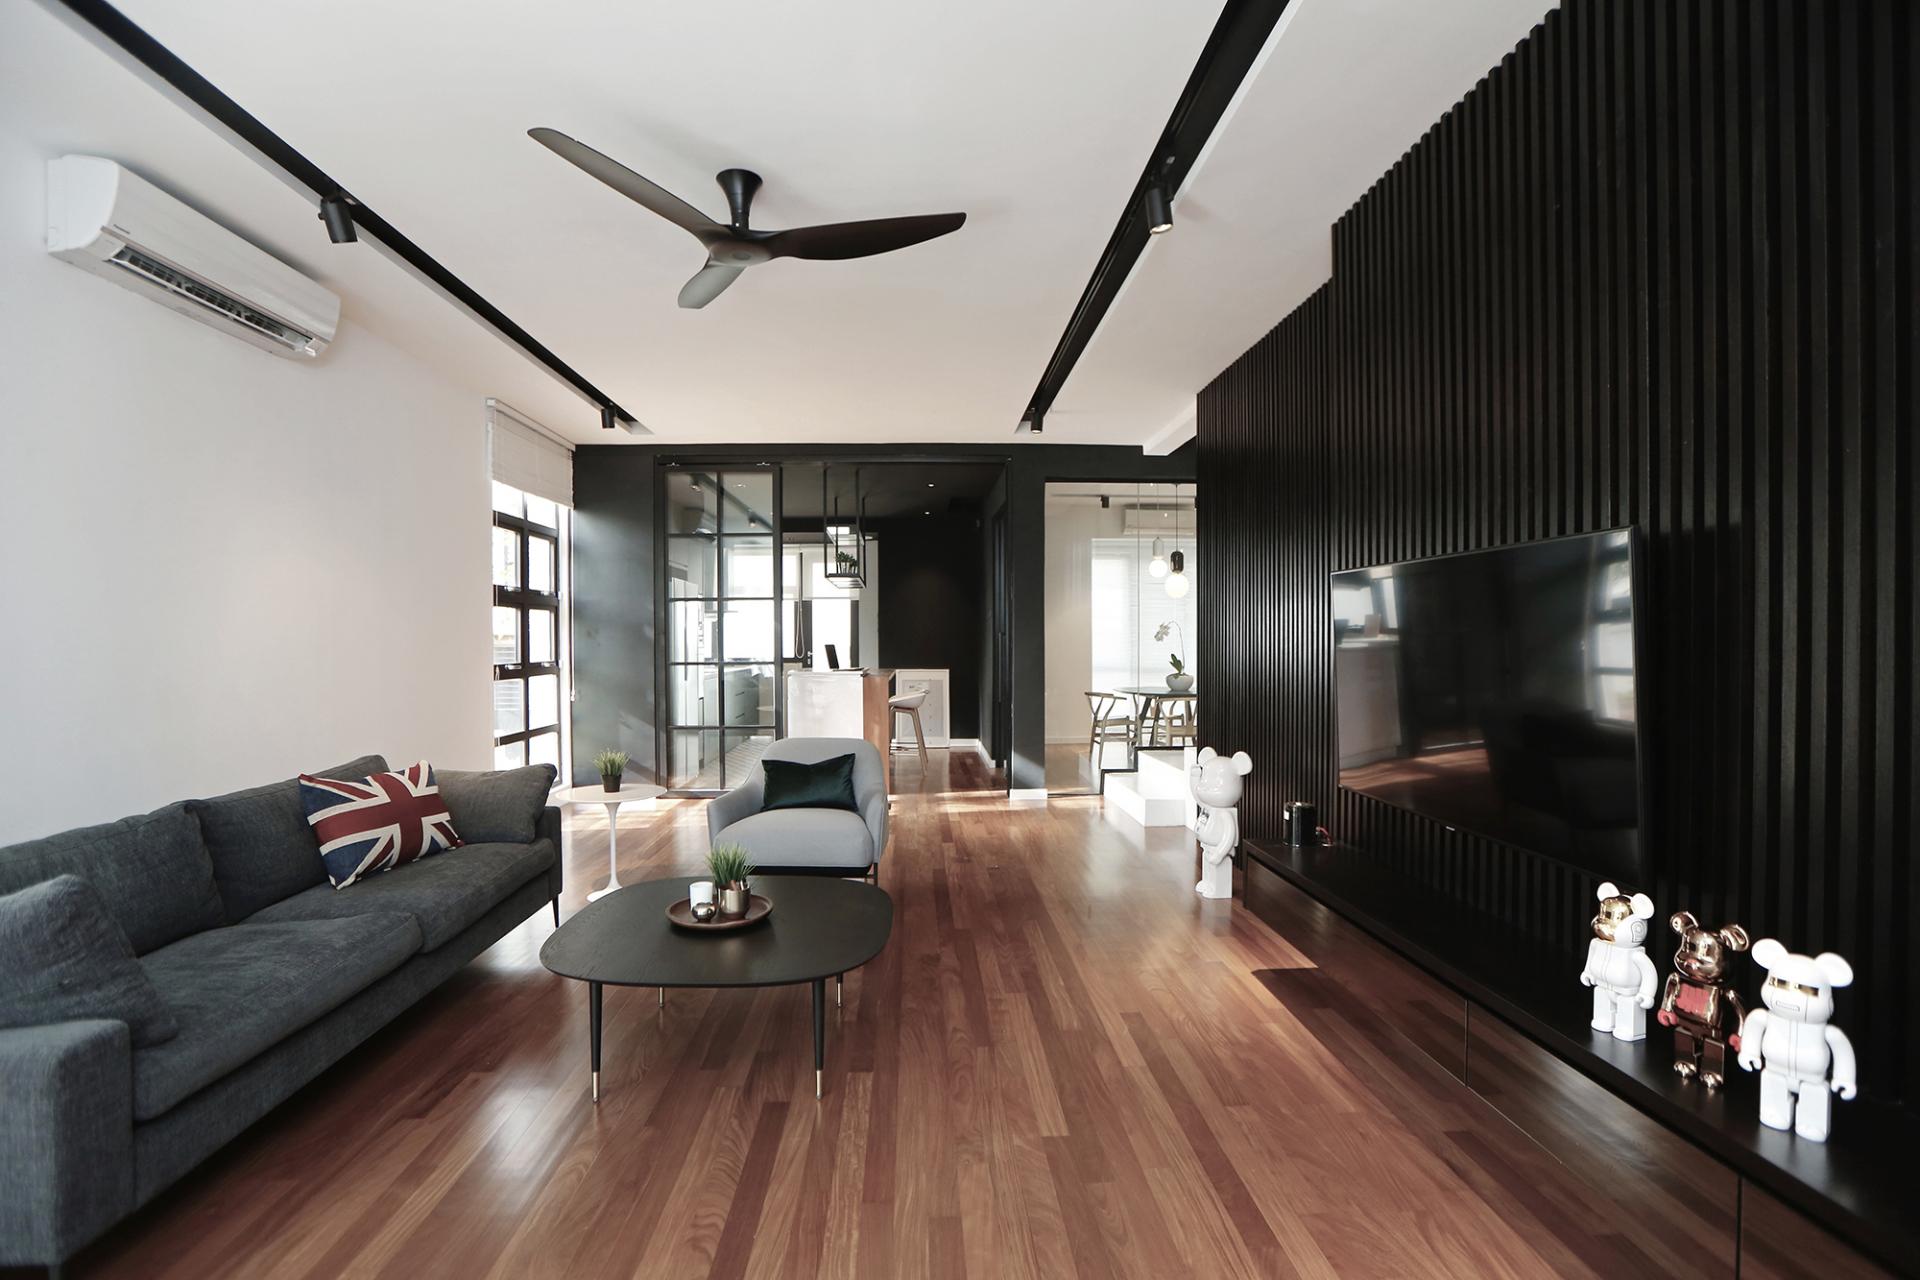 An Upscale, NYC-style Lofty House in Modest Puchong